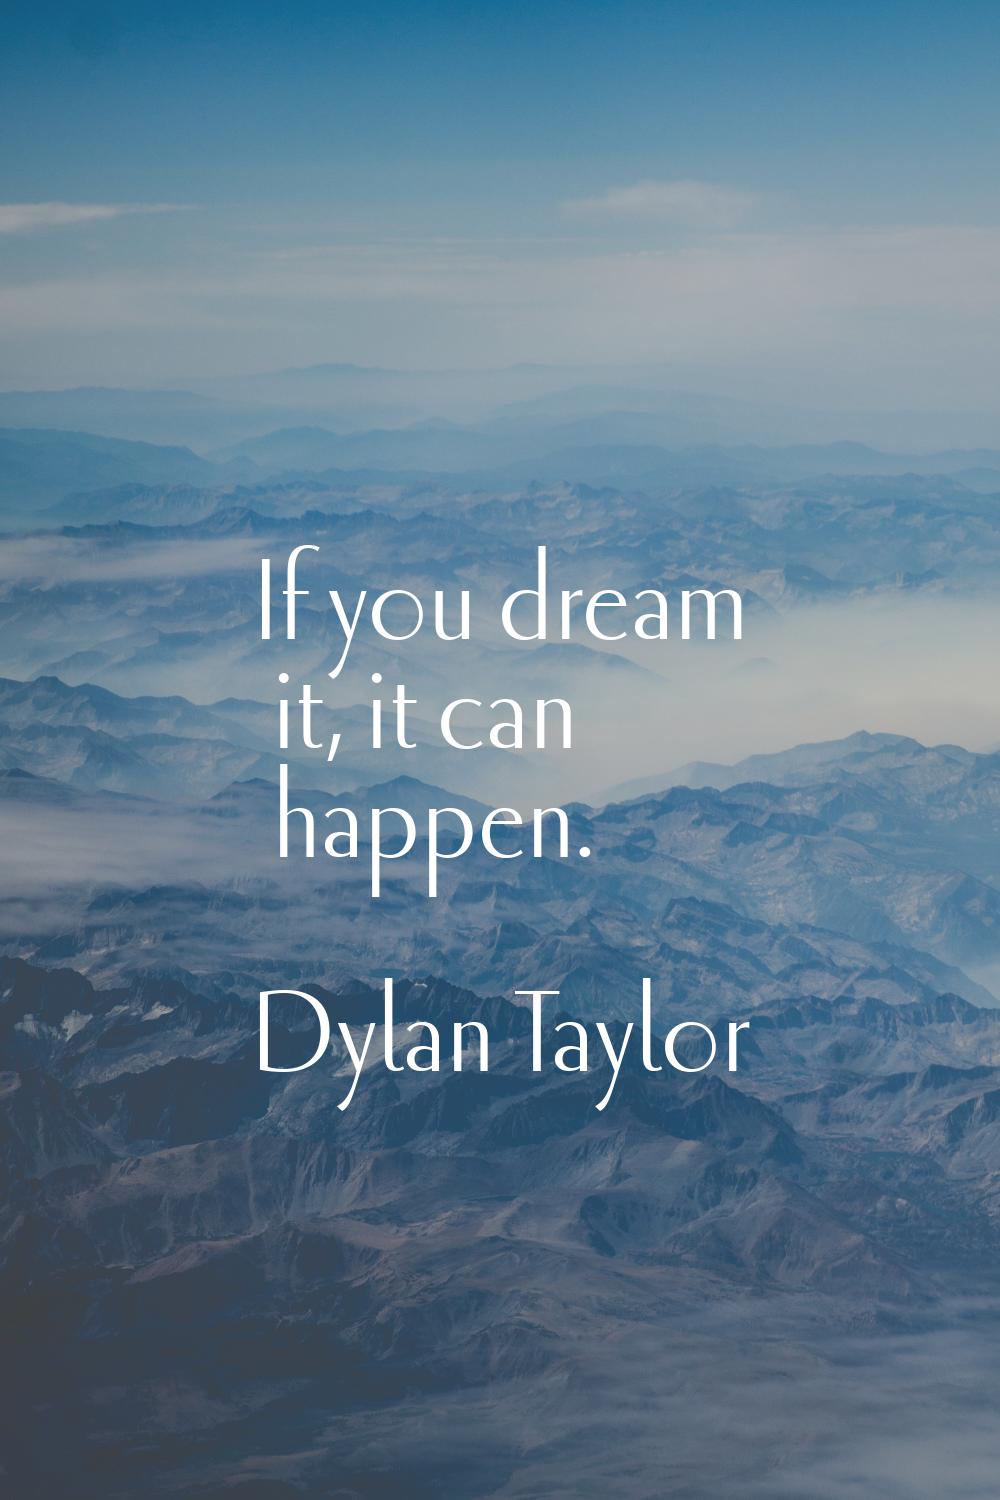 If you dream it, it can happen.